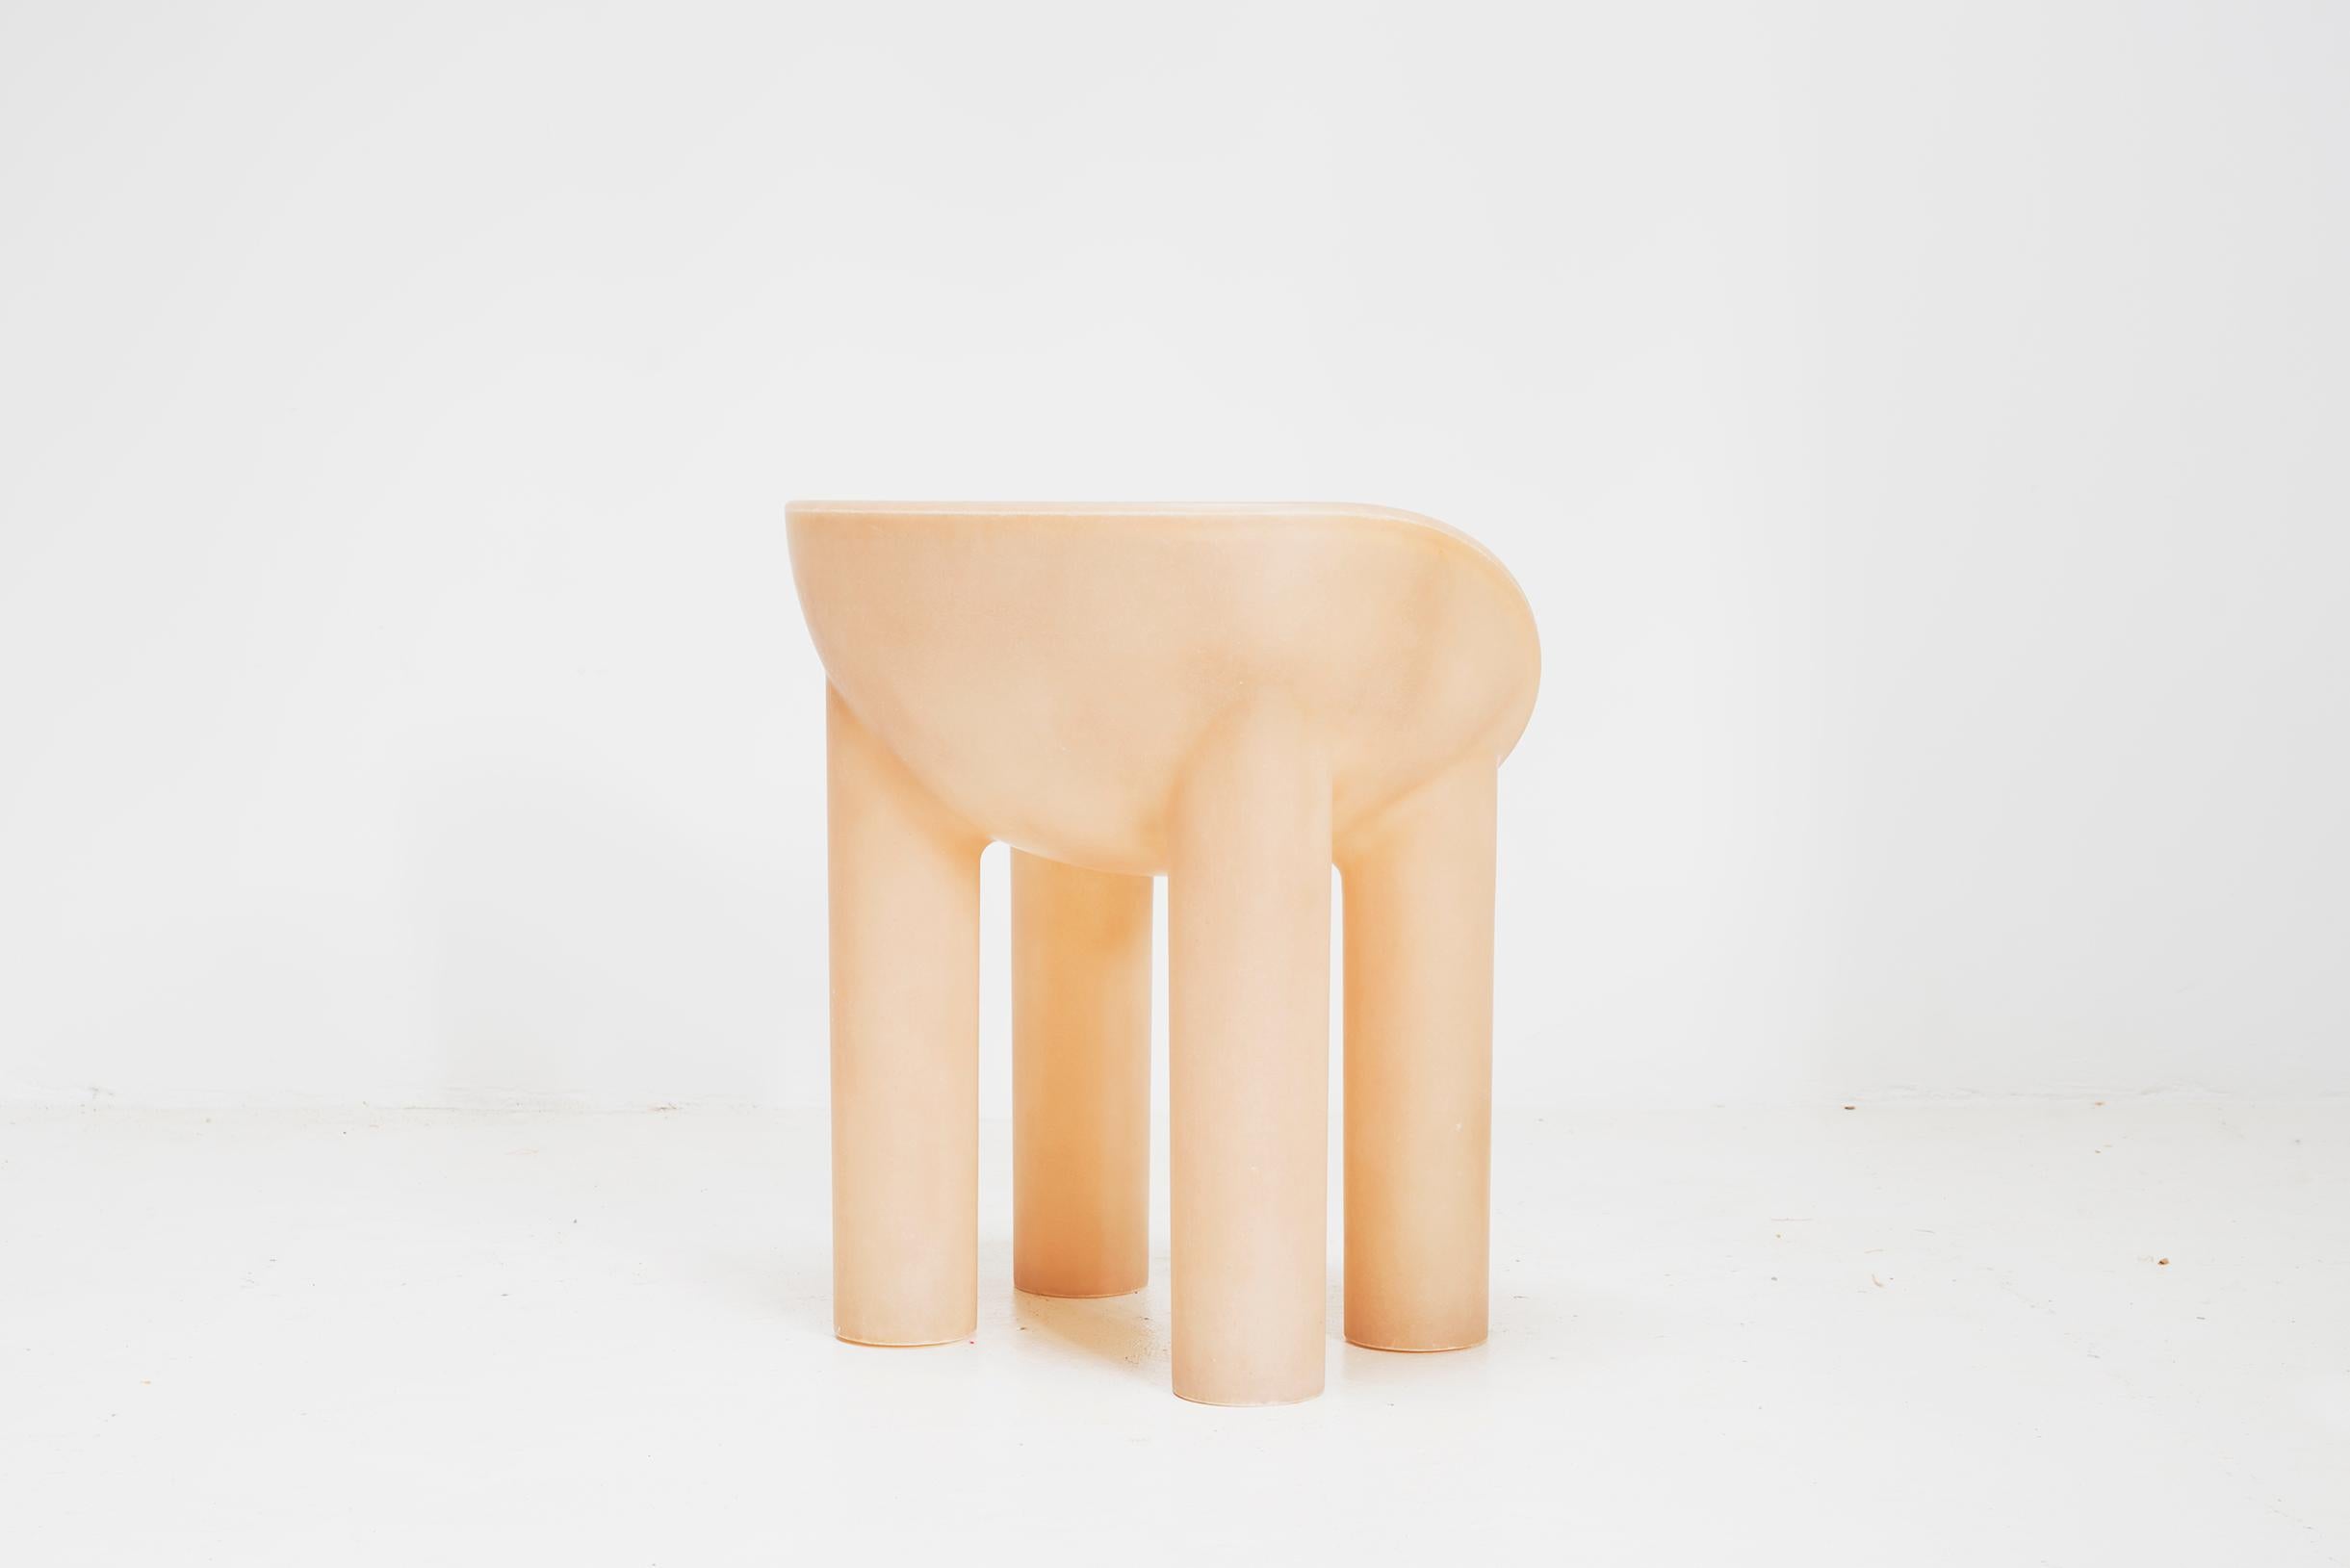 A taller iteration of the Roly-Poly chair, this scoop-seated chair with four plump legs is cast
as a single piece of fibreglass, available in milky translucent fibreglass hue that evokes vintage Bakelite
Fibreglass
Measures: 75cm high x 50cm deep